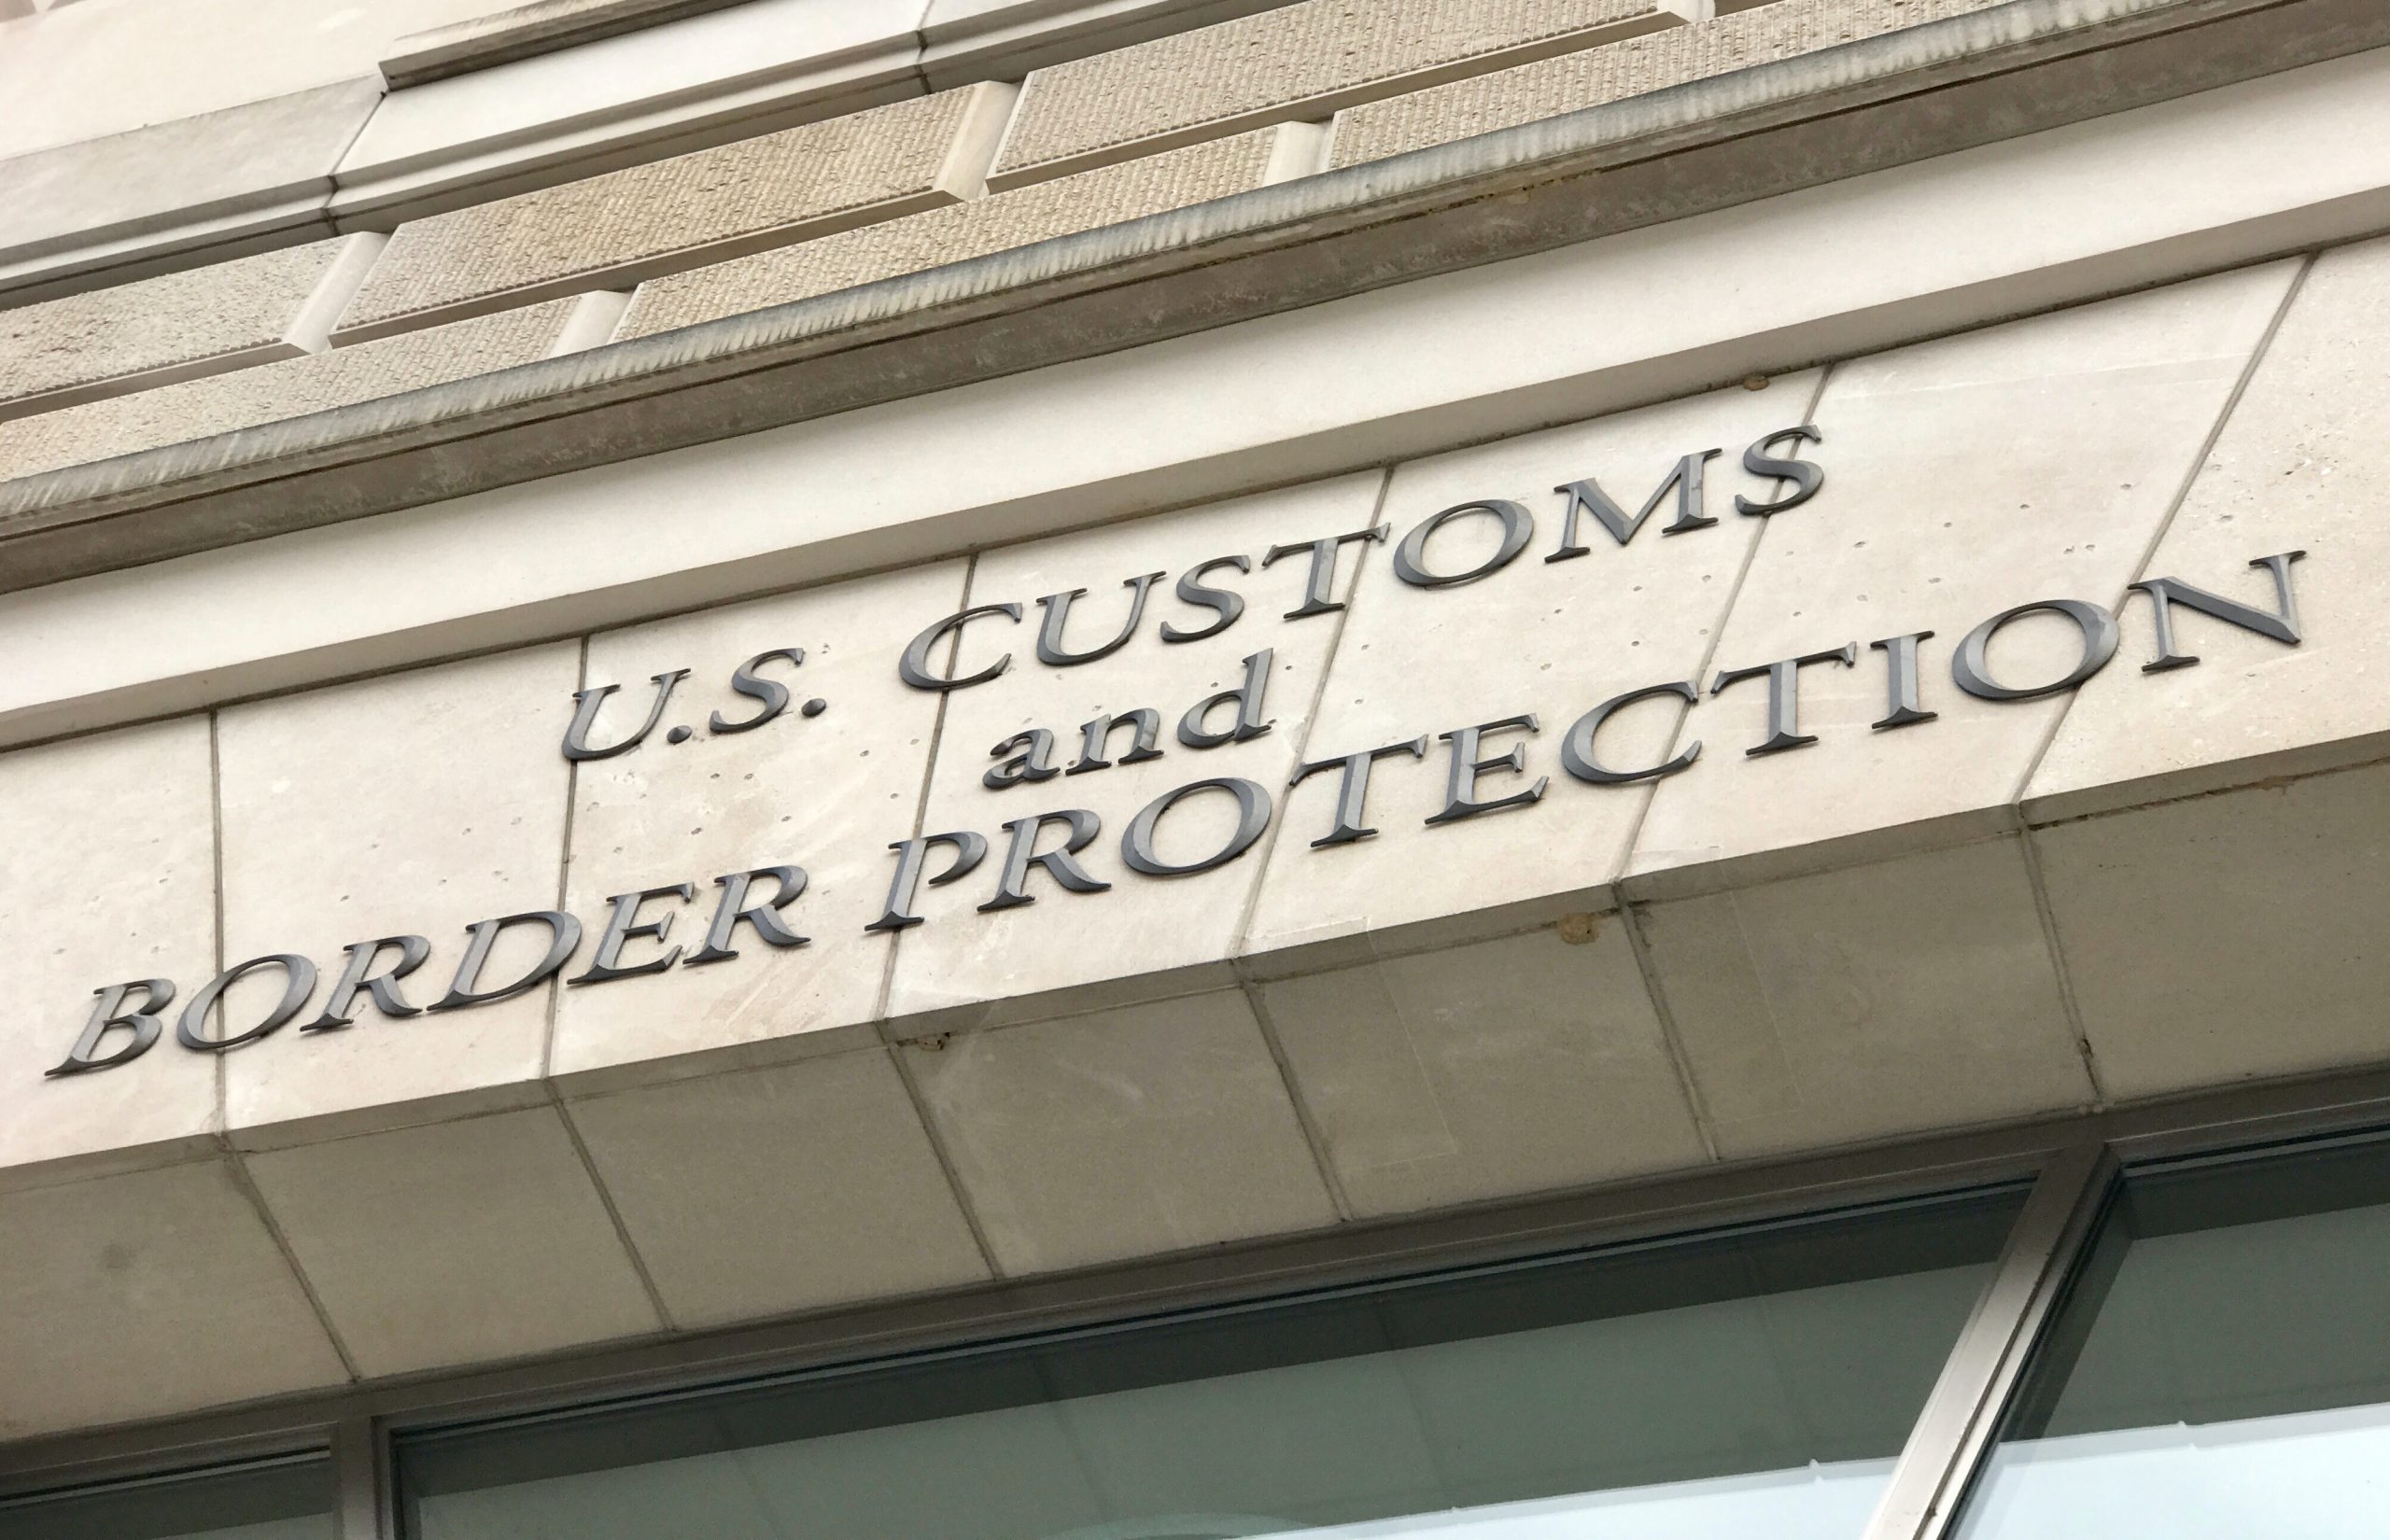 U.S. Customs and Border Protection building sign